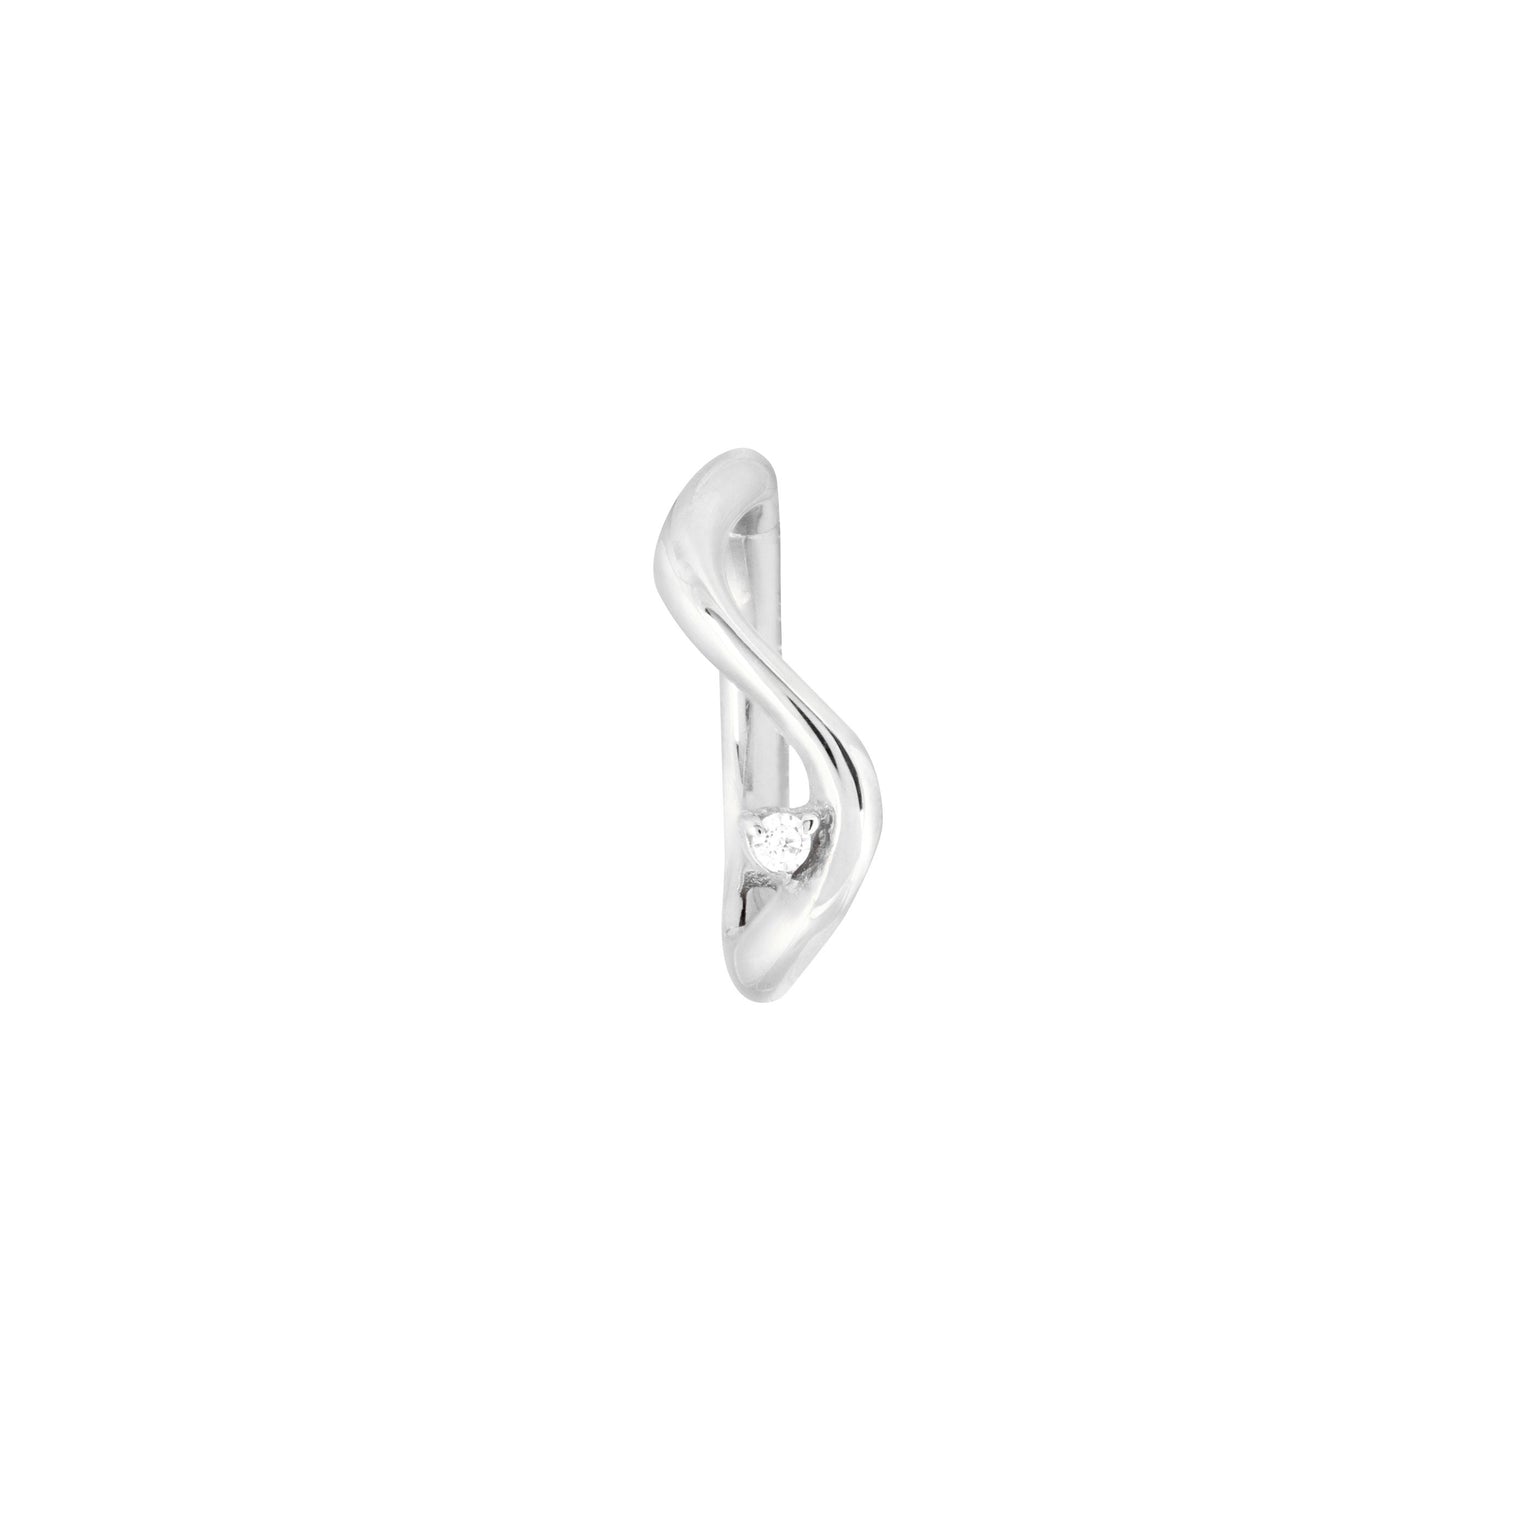 Solid White Gold Wave Rook Hoop